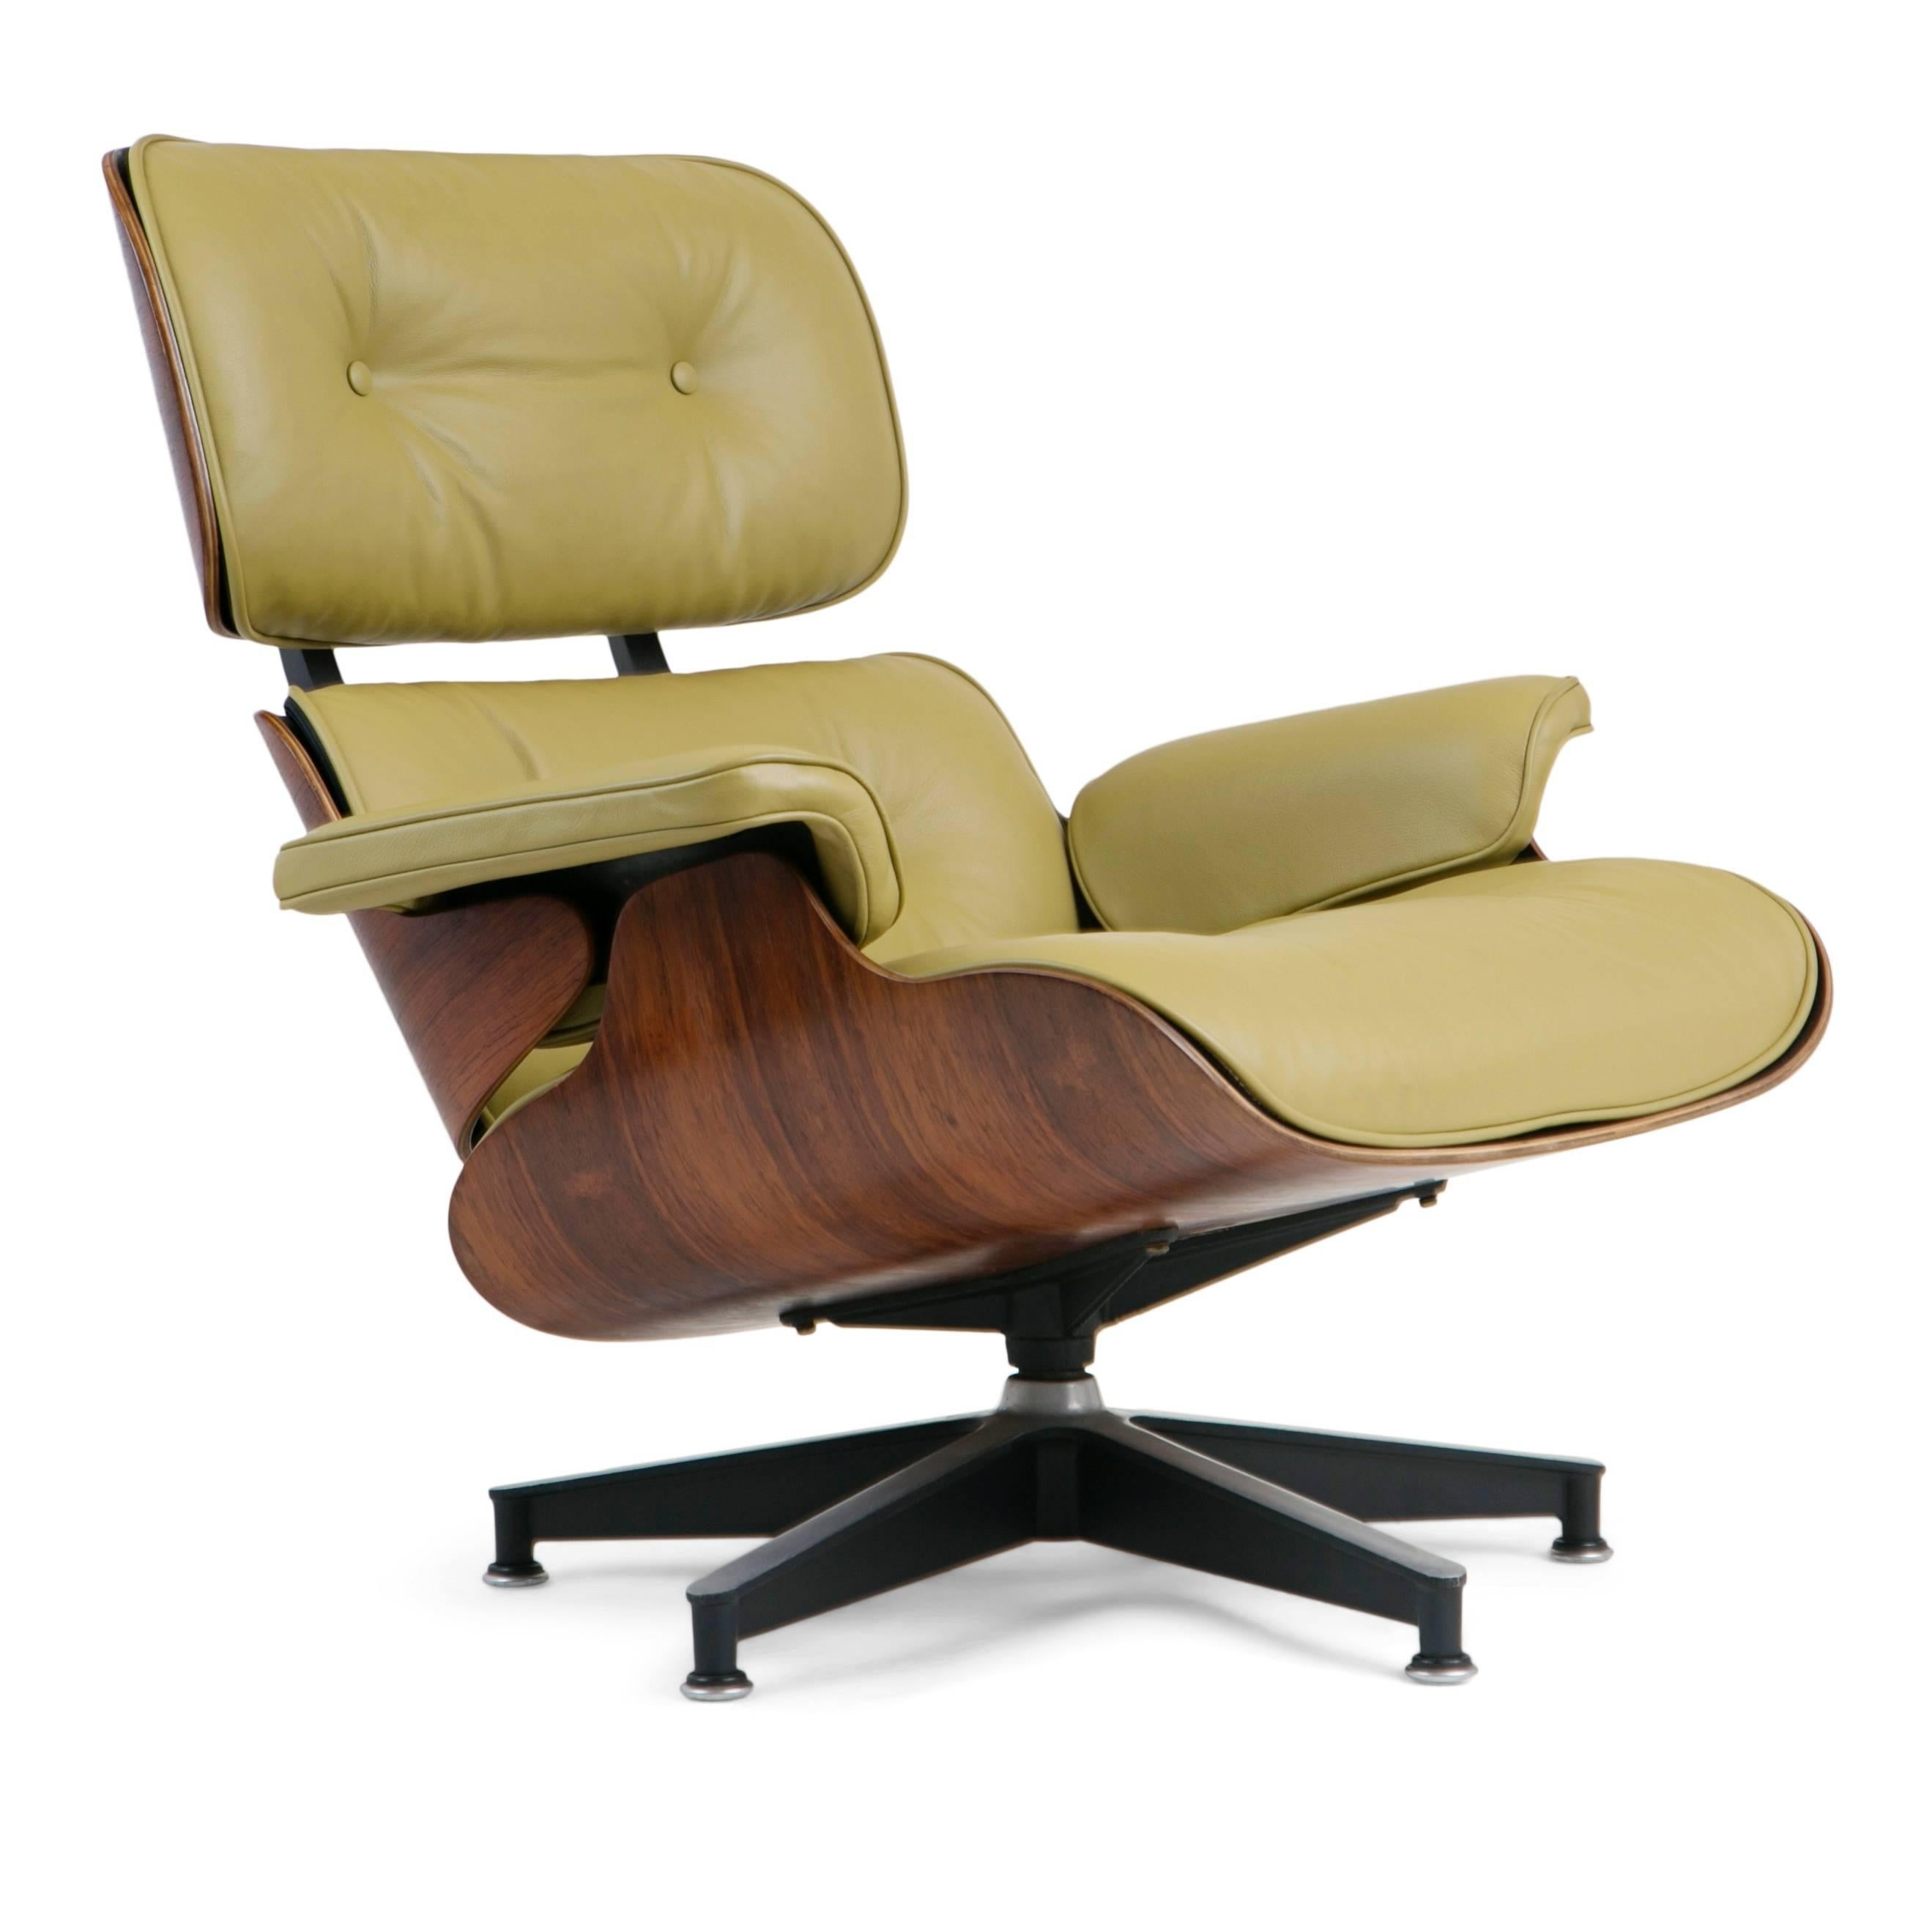 Early Production Model 670/671 Lounge Chair & Ottoman by Charles & Ray Eames (amerikanisch)